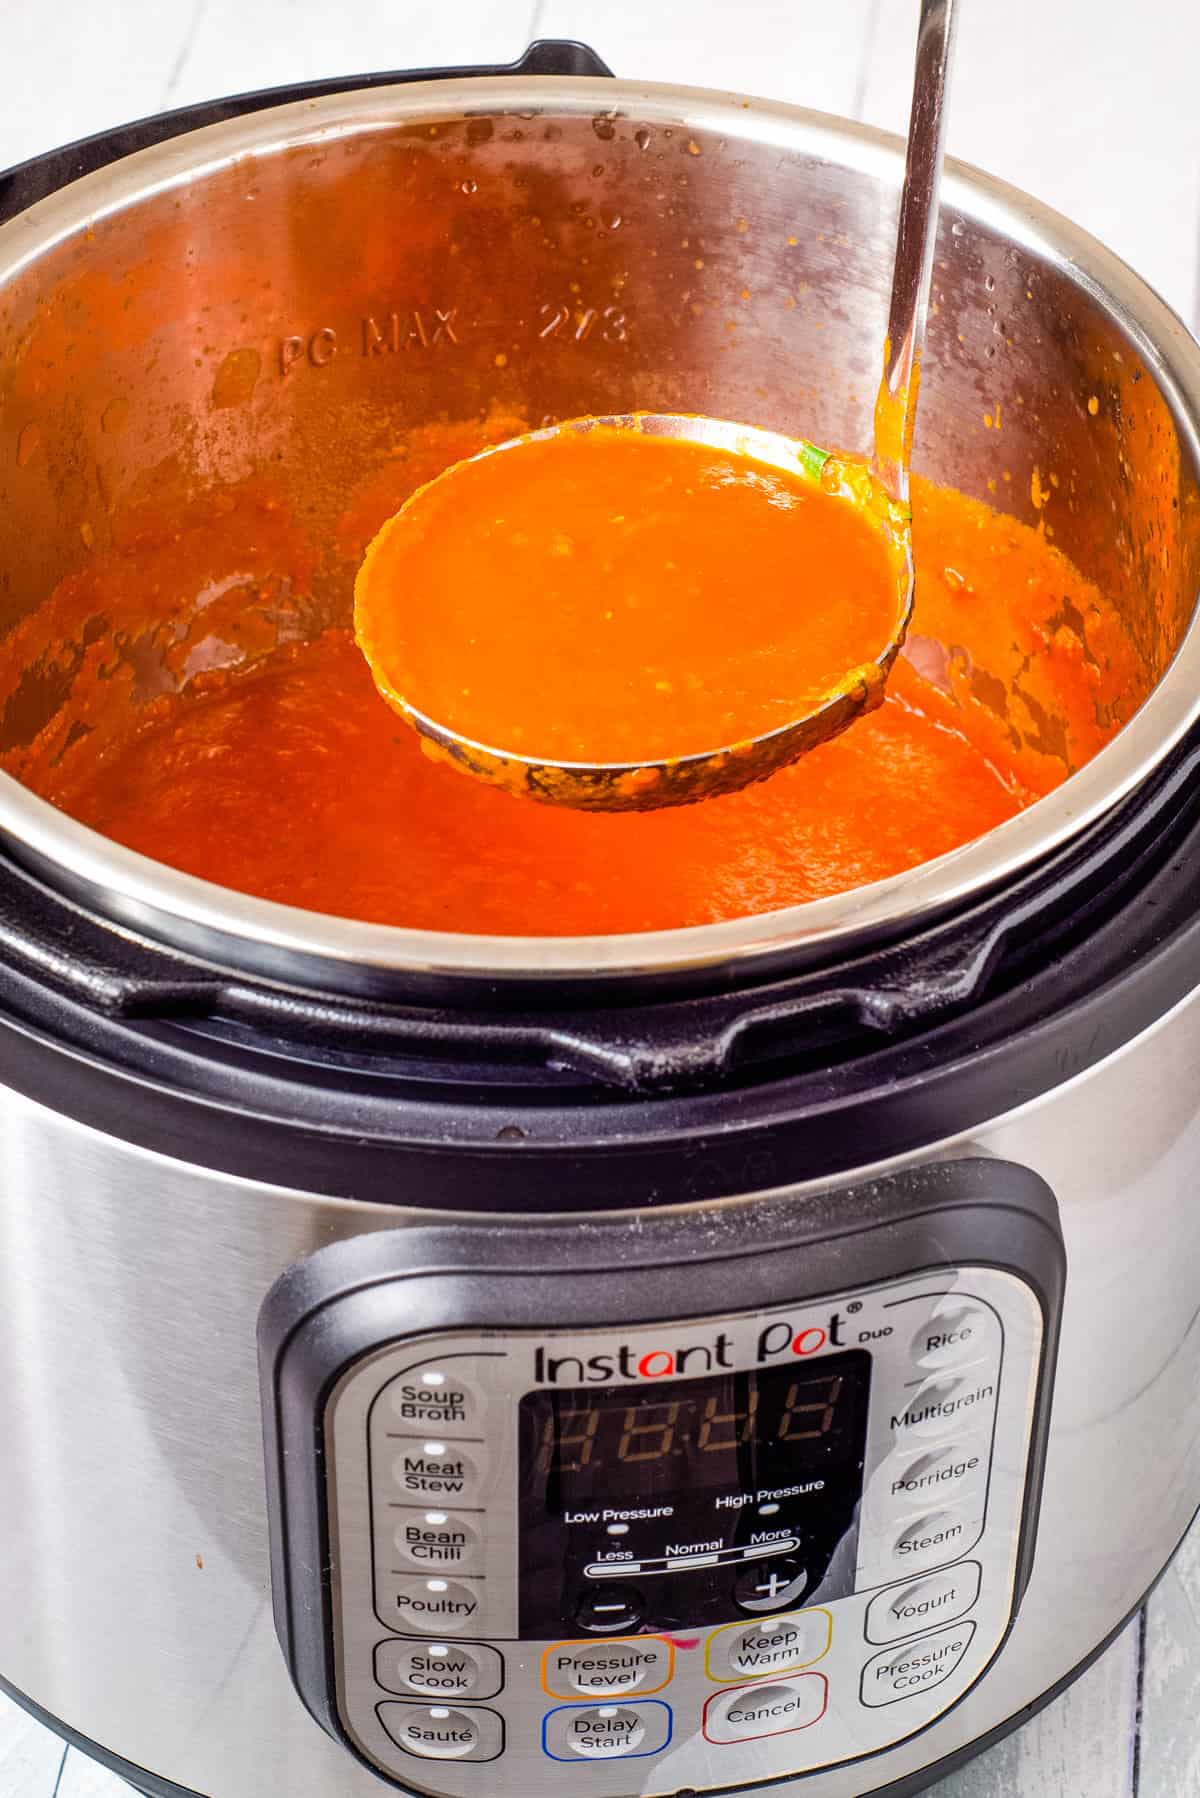 A close-up view of tomato soup being scooped out of the instant pot.